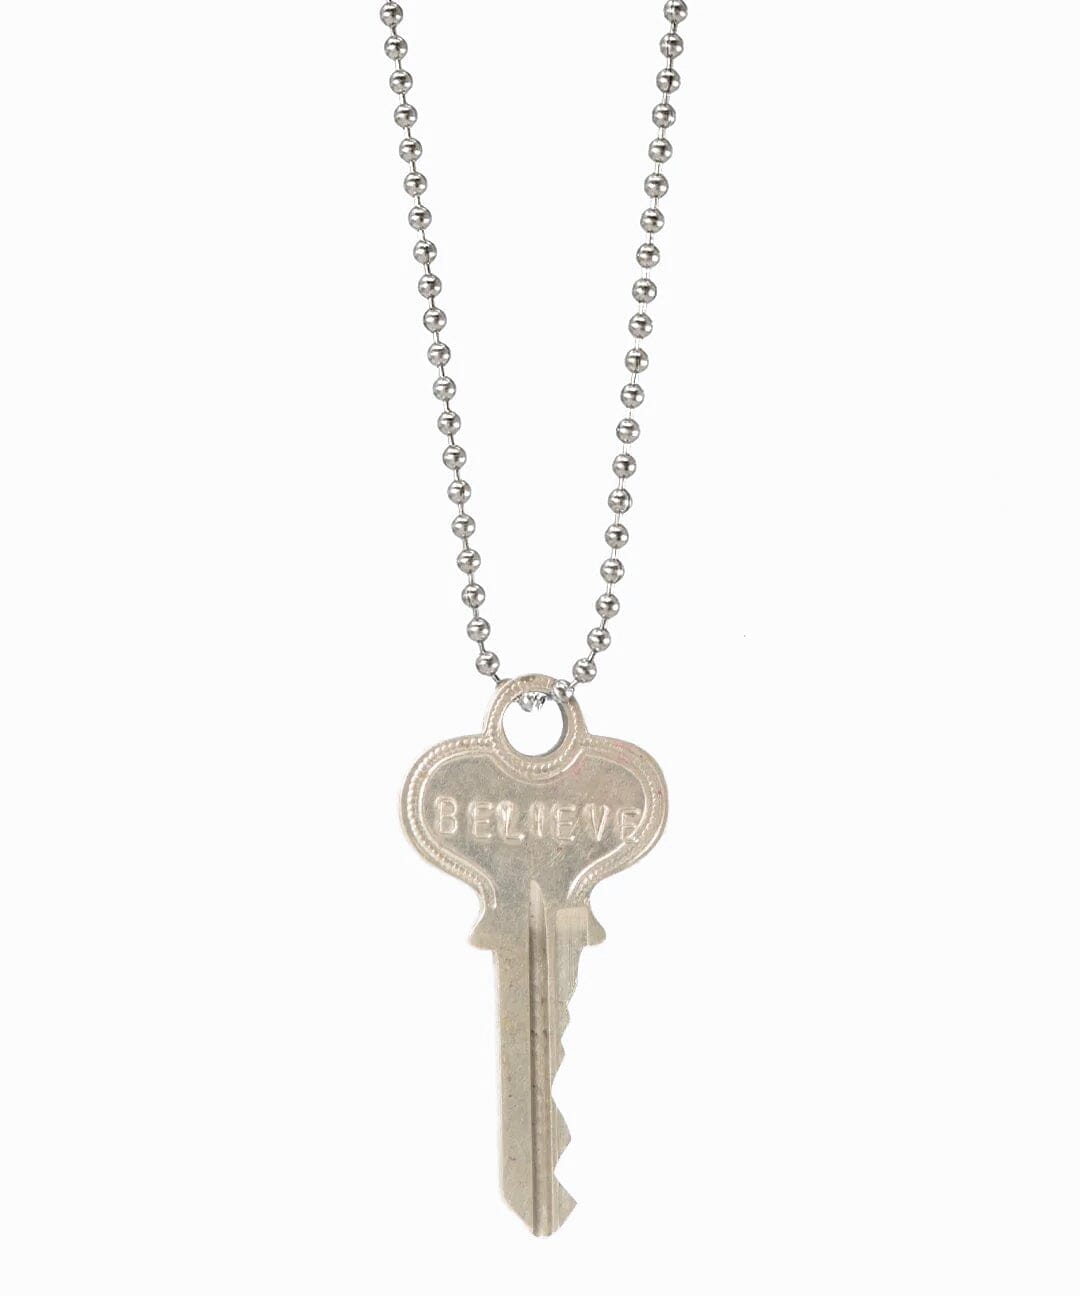 Beige Classic Ball Chain Key Necklace, Gold